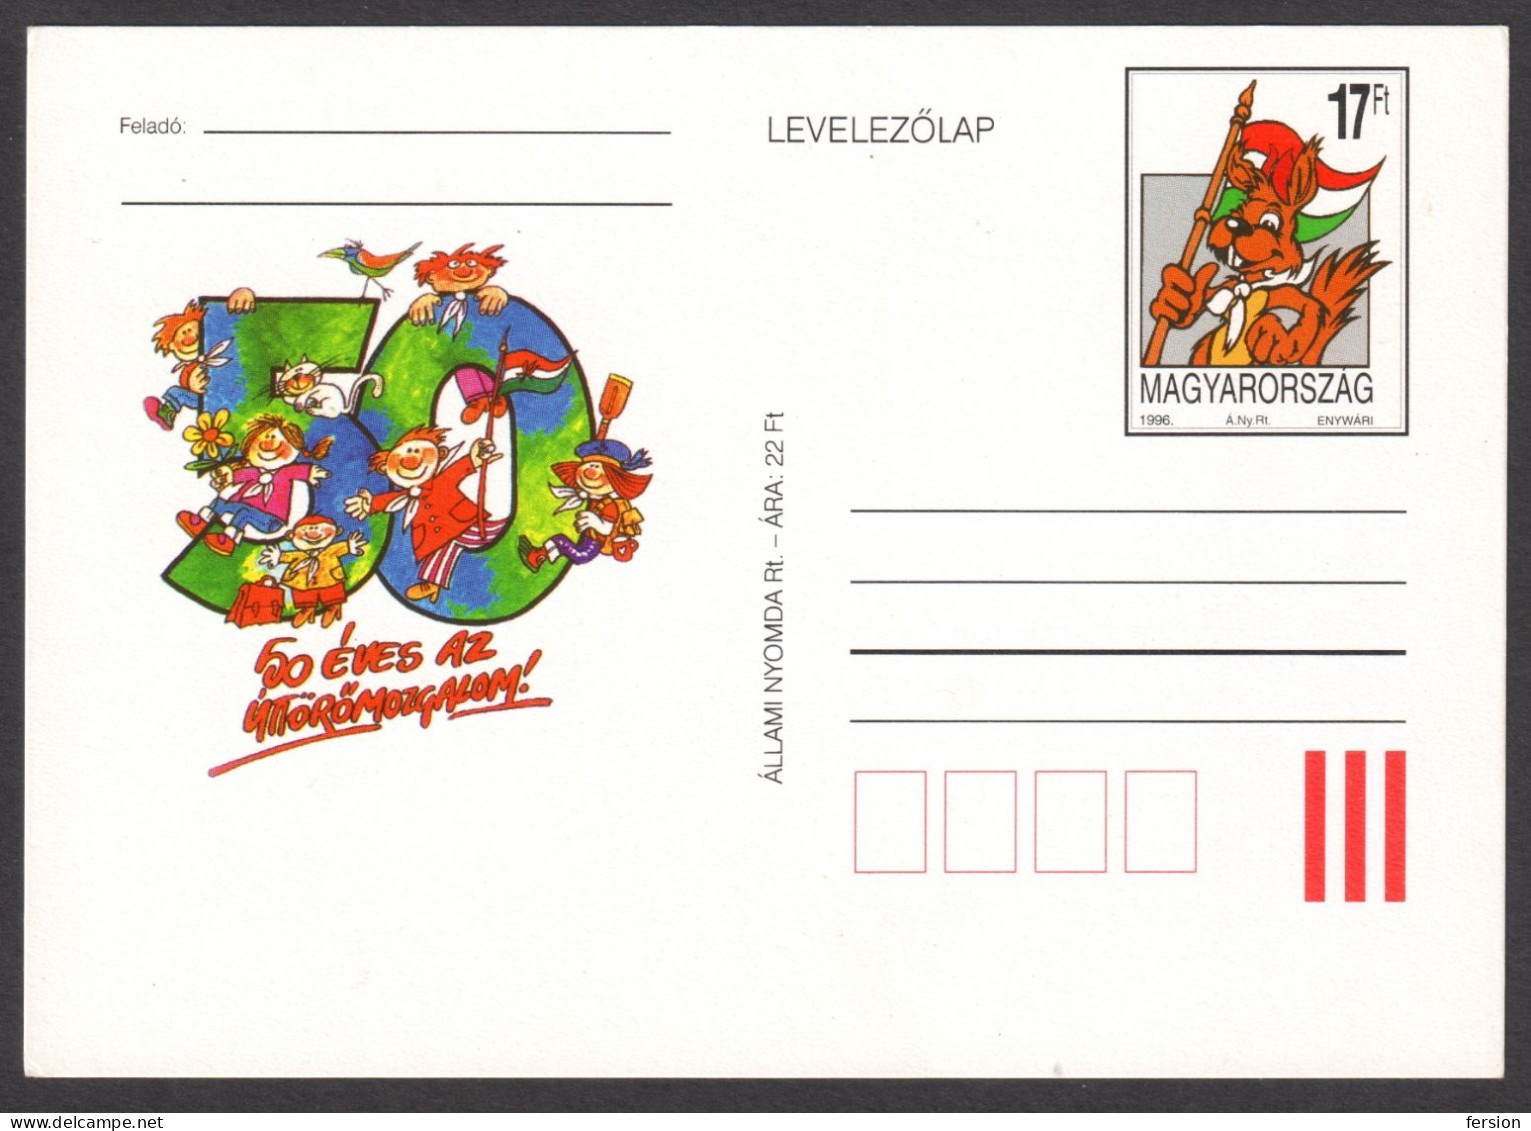 Squirrel  - 1996 HUNGARY - 50th Anniv. Of Pioneer Movement / SCOUT SCOUTS - STATIONERY - POSTCARD - FLAG Tricolor - Covers & Documents